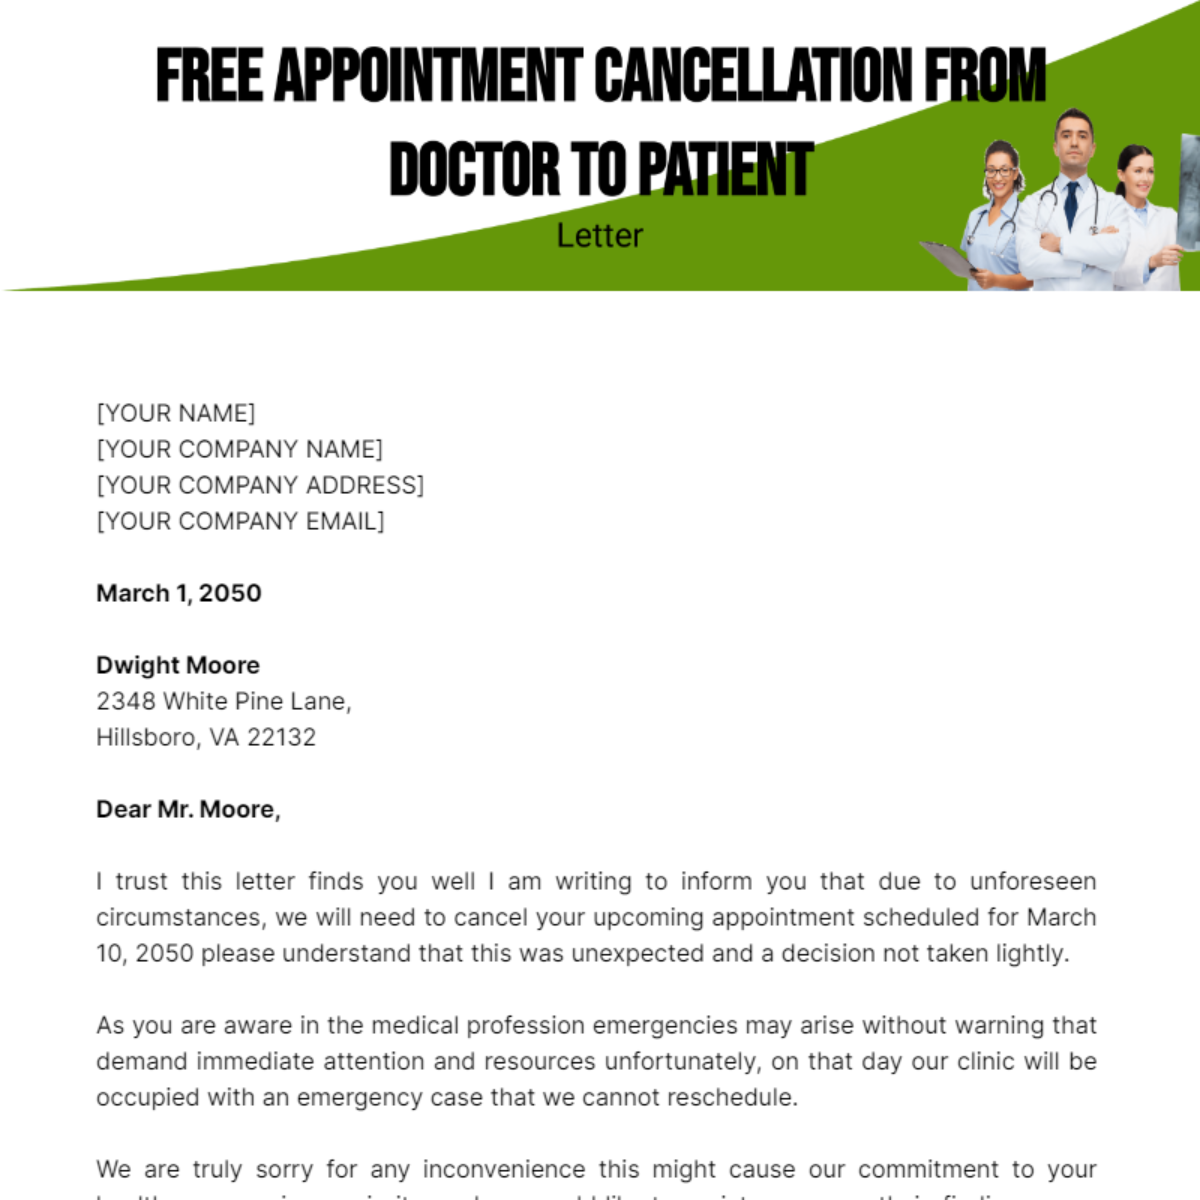 Appointment Cancellation Letter from Doctor to Patient Template